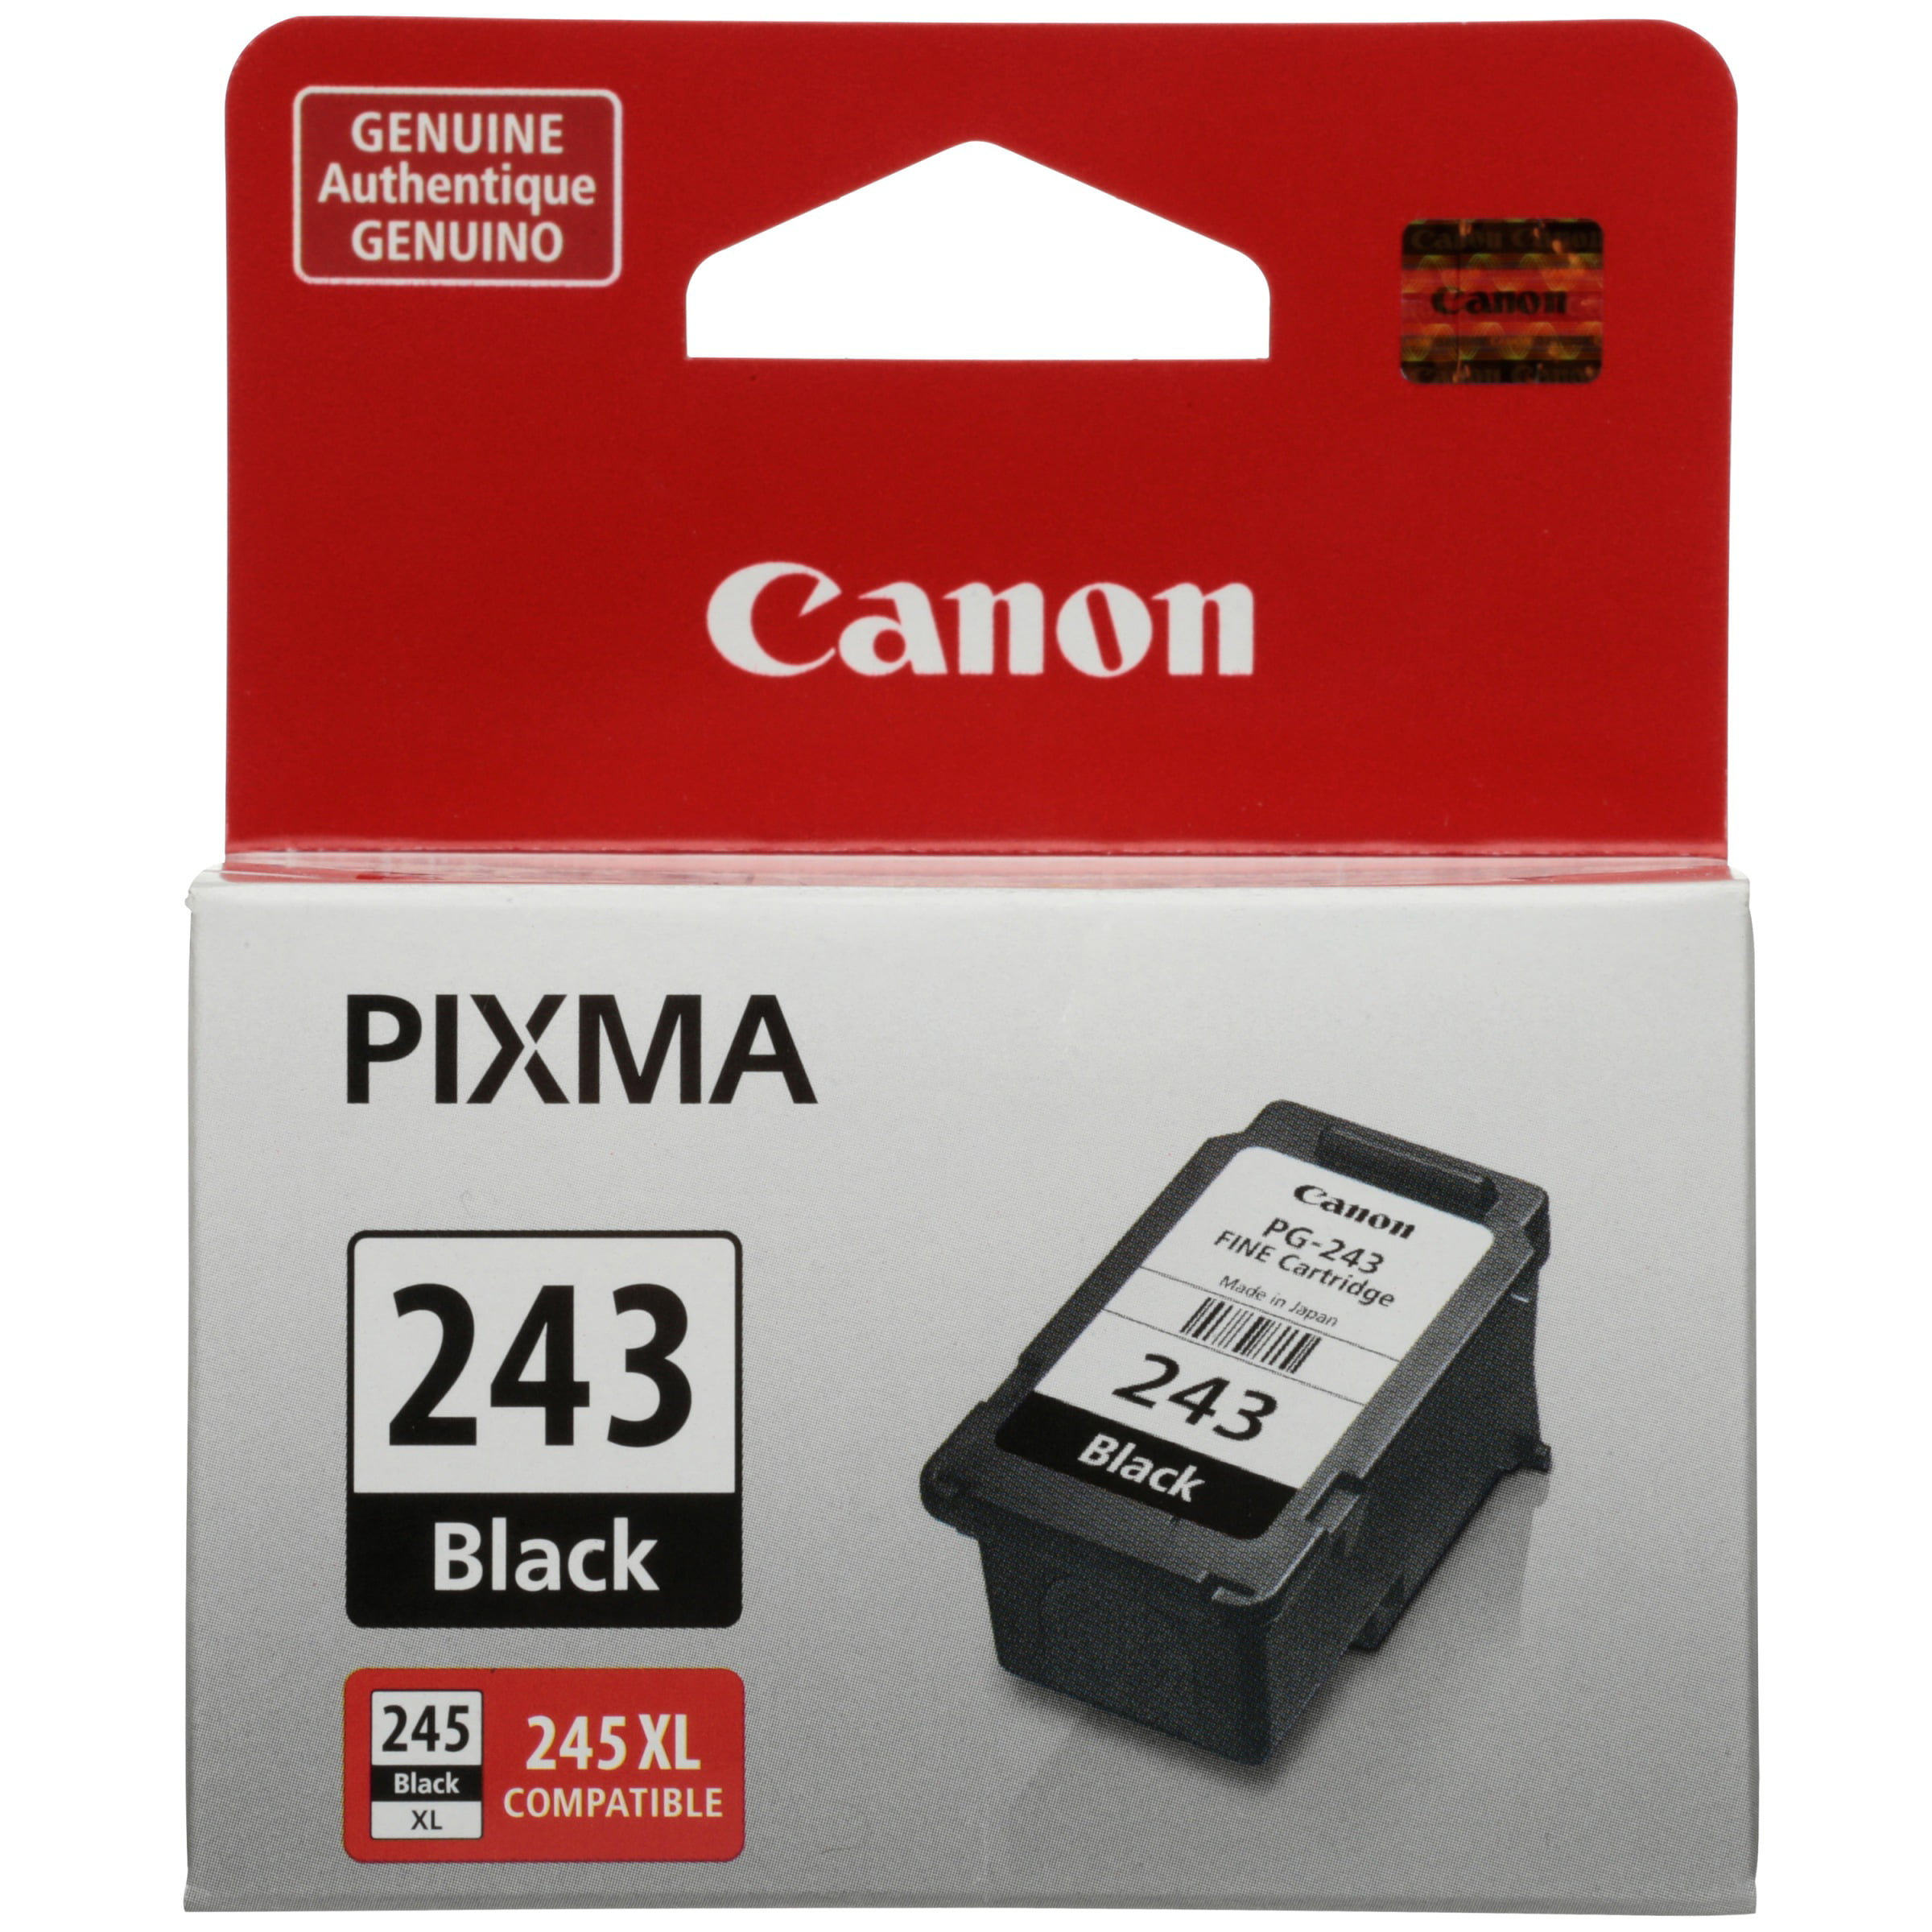 Ink Cartridge Compatibility Chart Canon